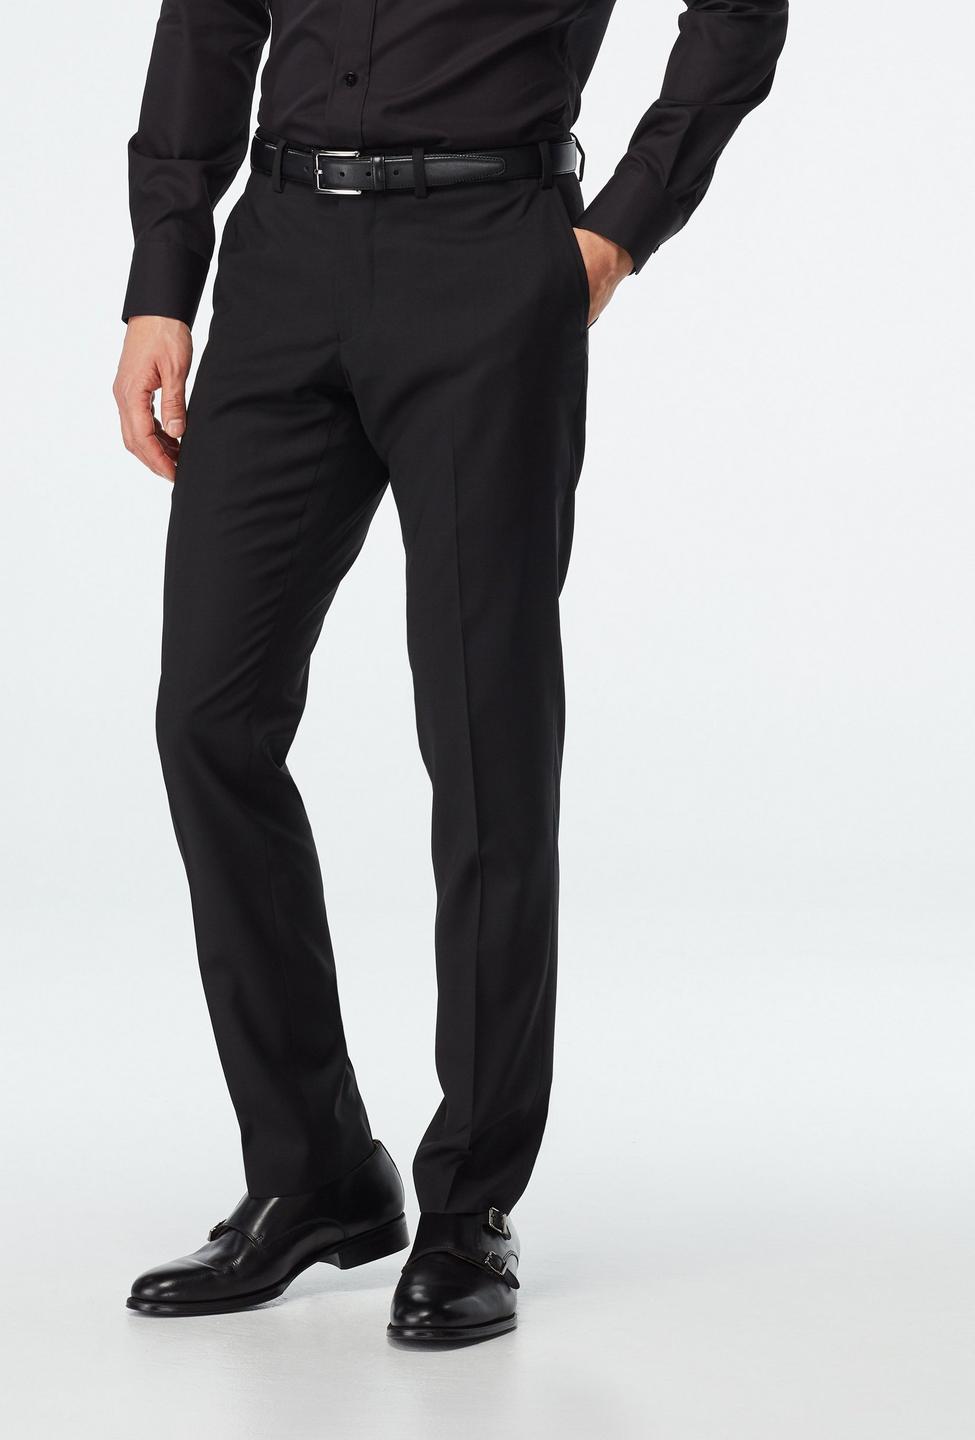 Black pants - Milano Solid Design from Indochino Collection